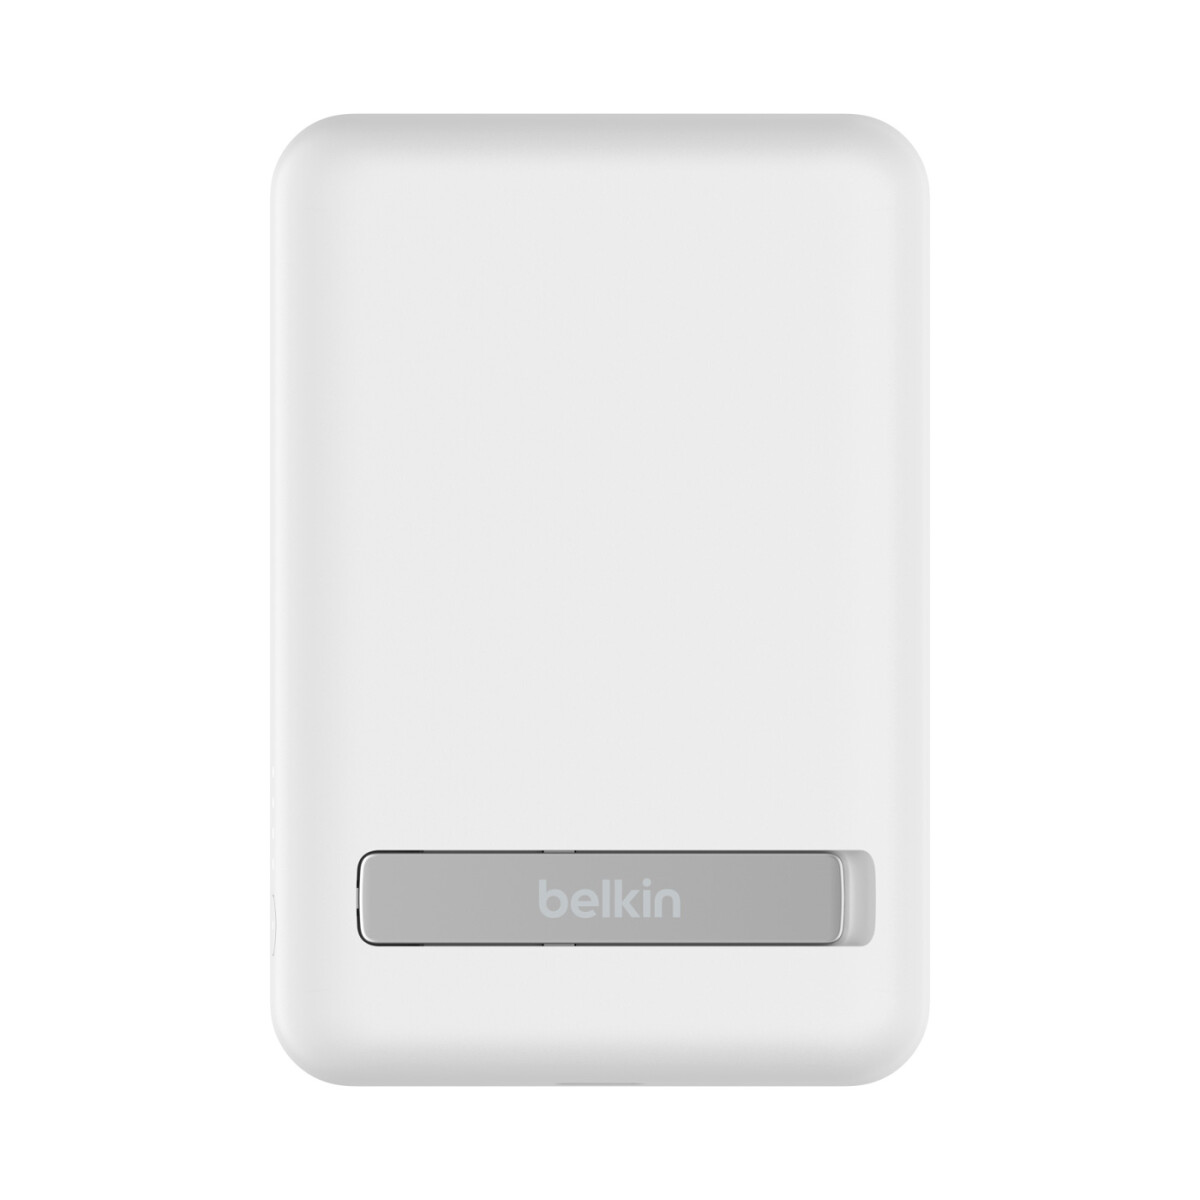 Power Bank Inalámbrica Belkin Magnetic Wireless 5000 mAh 5K + Stand BOOST CHARGE - Blanco 